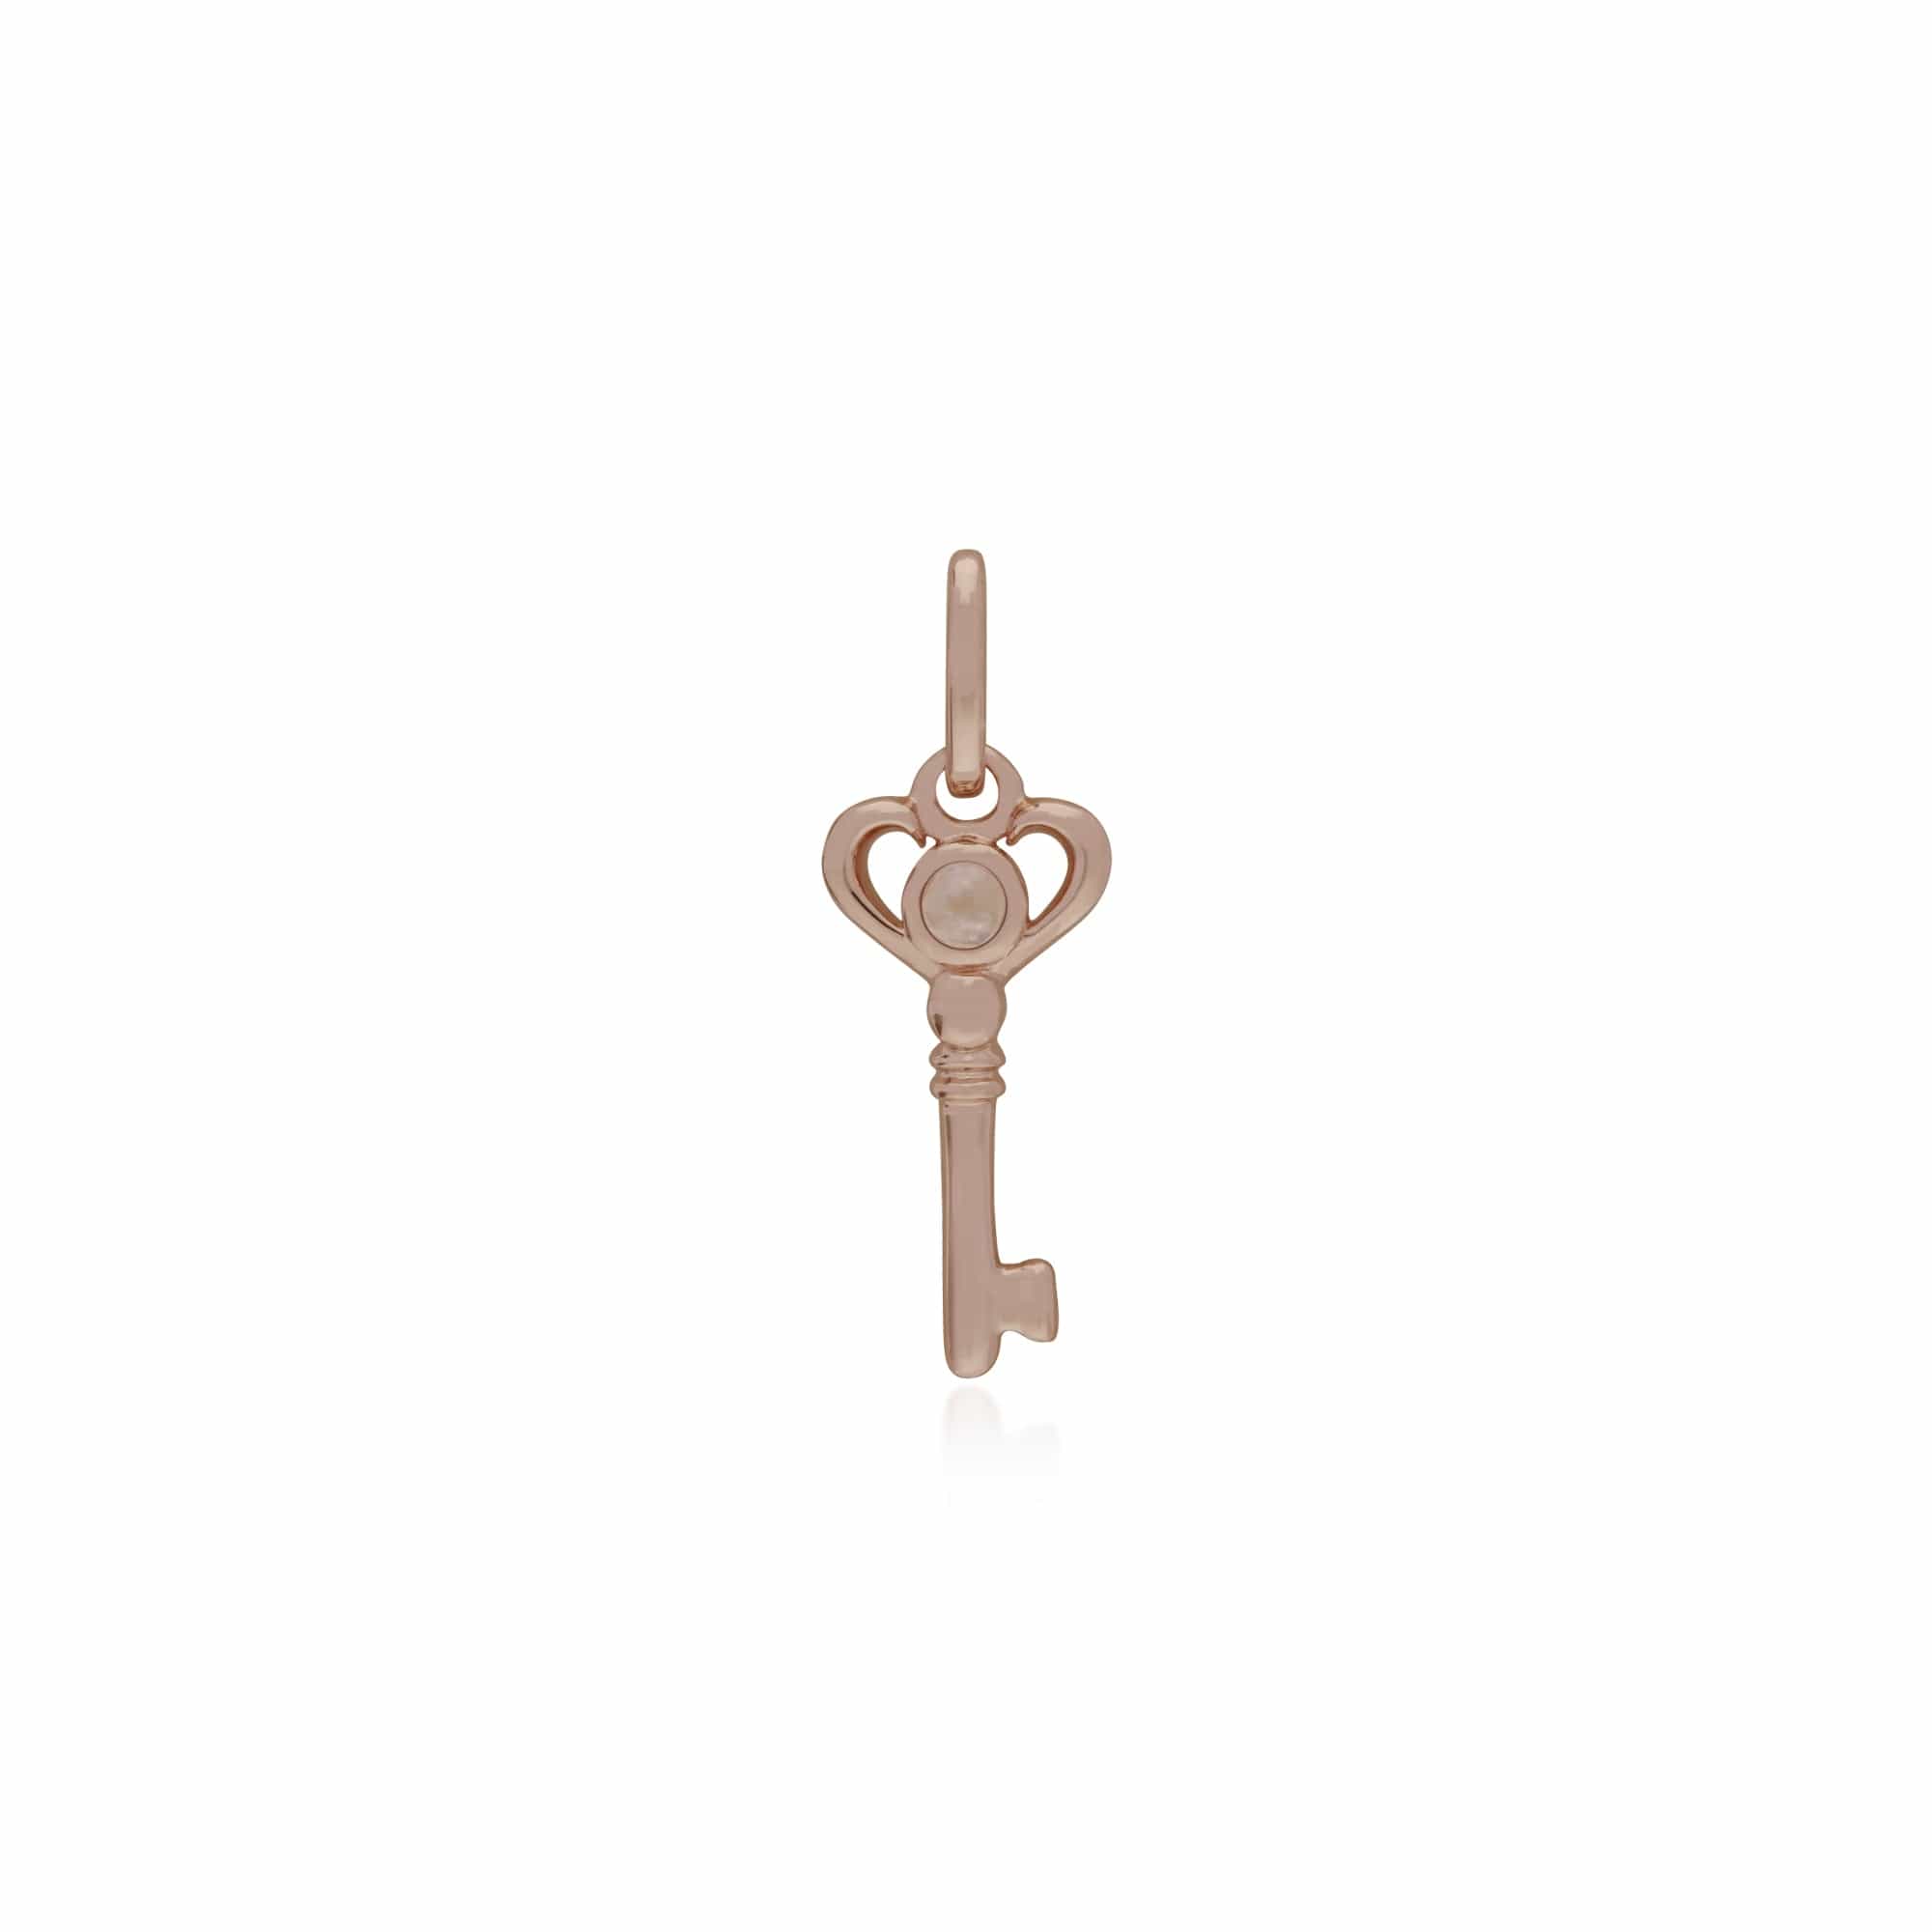 270P028601925-270P026901925 Classic Heart Lock Pendant & Rainbow Moonstone Key Charm in Rose Gold Plated 925 Sterling Silver 2